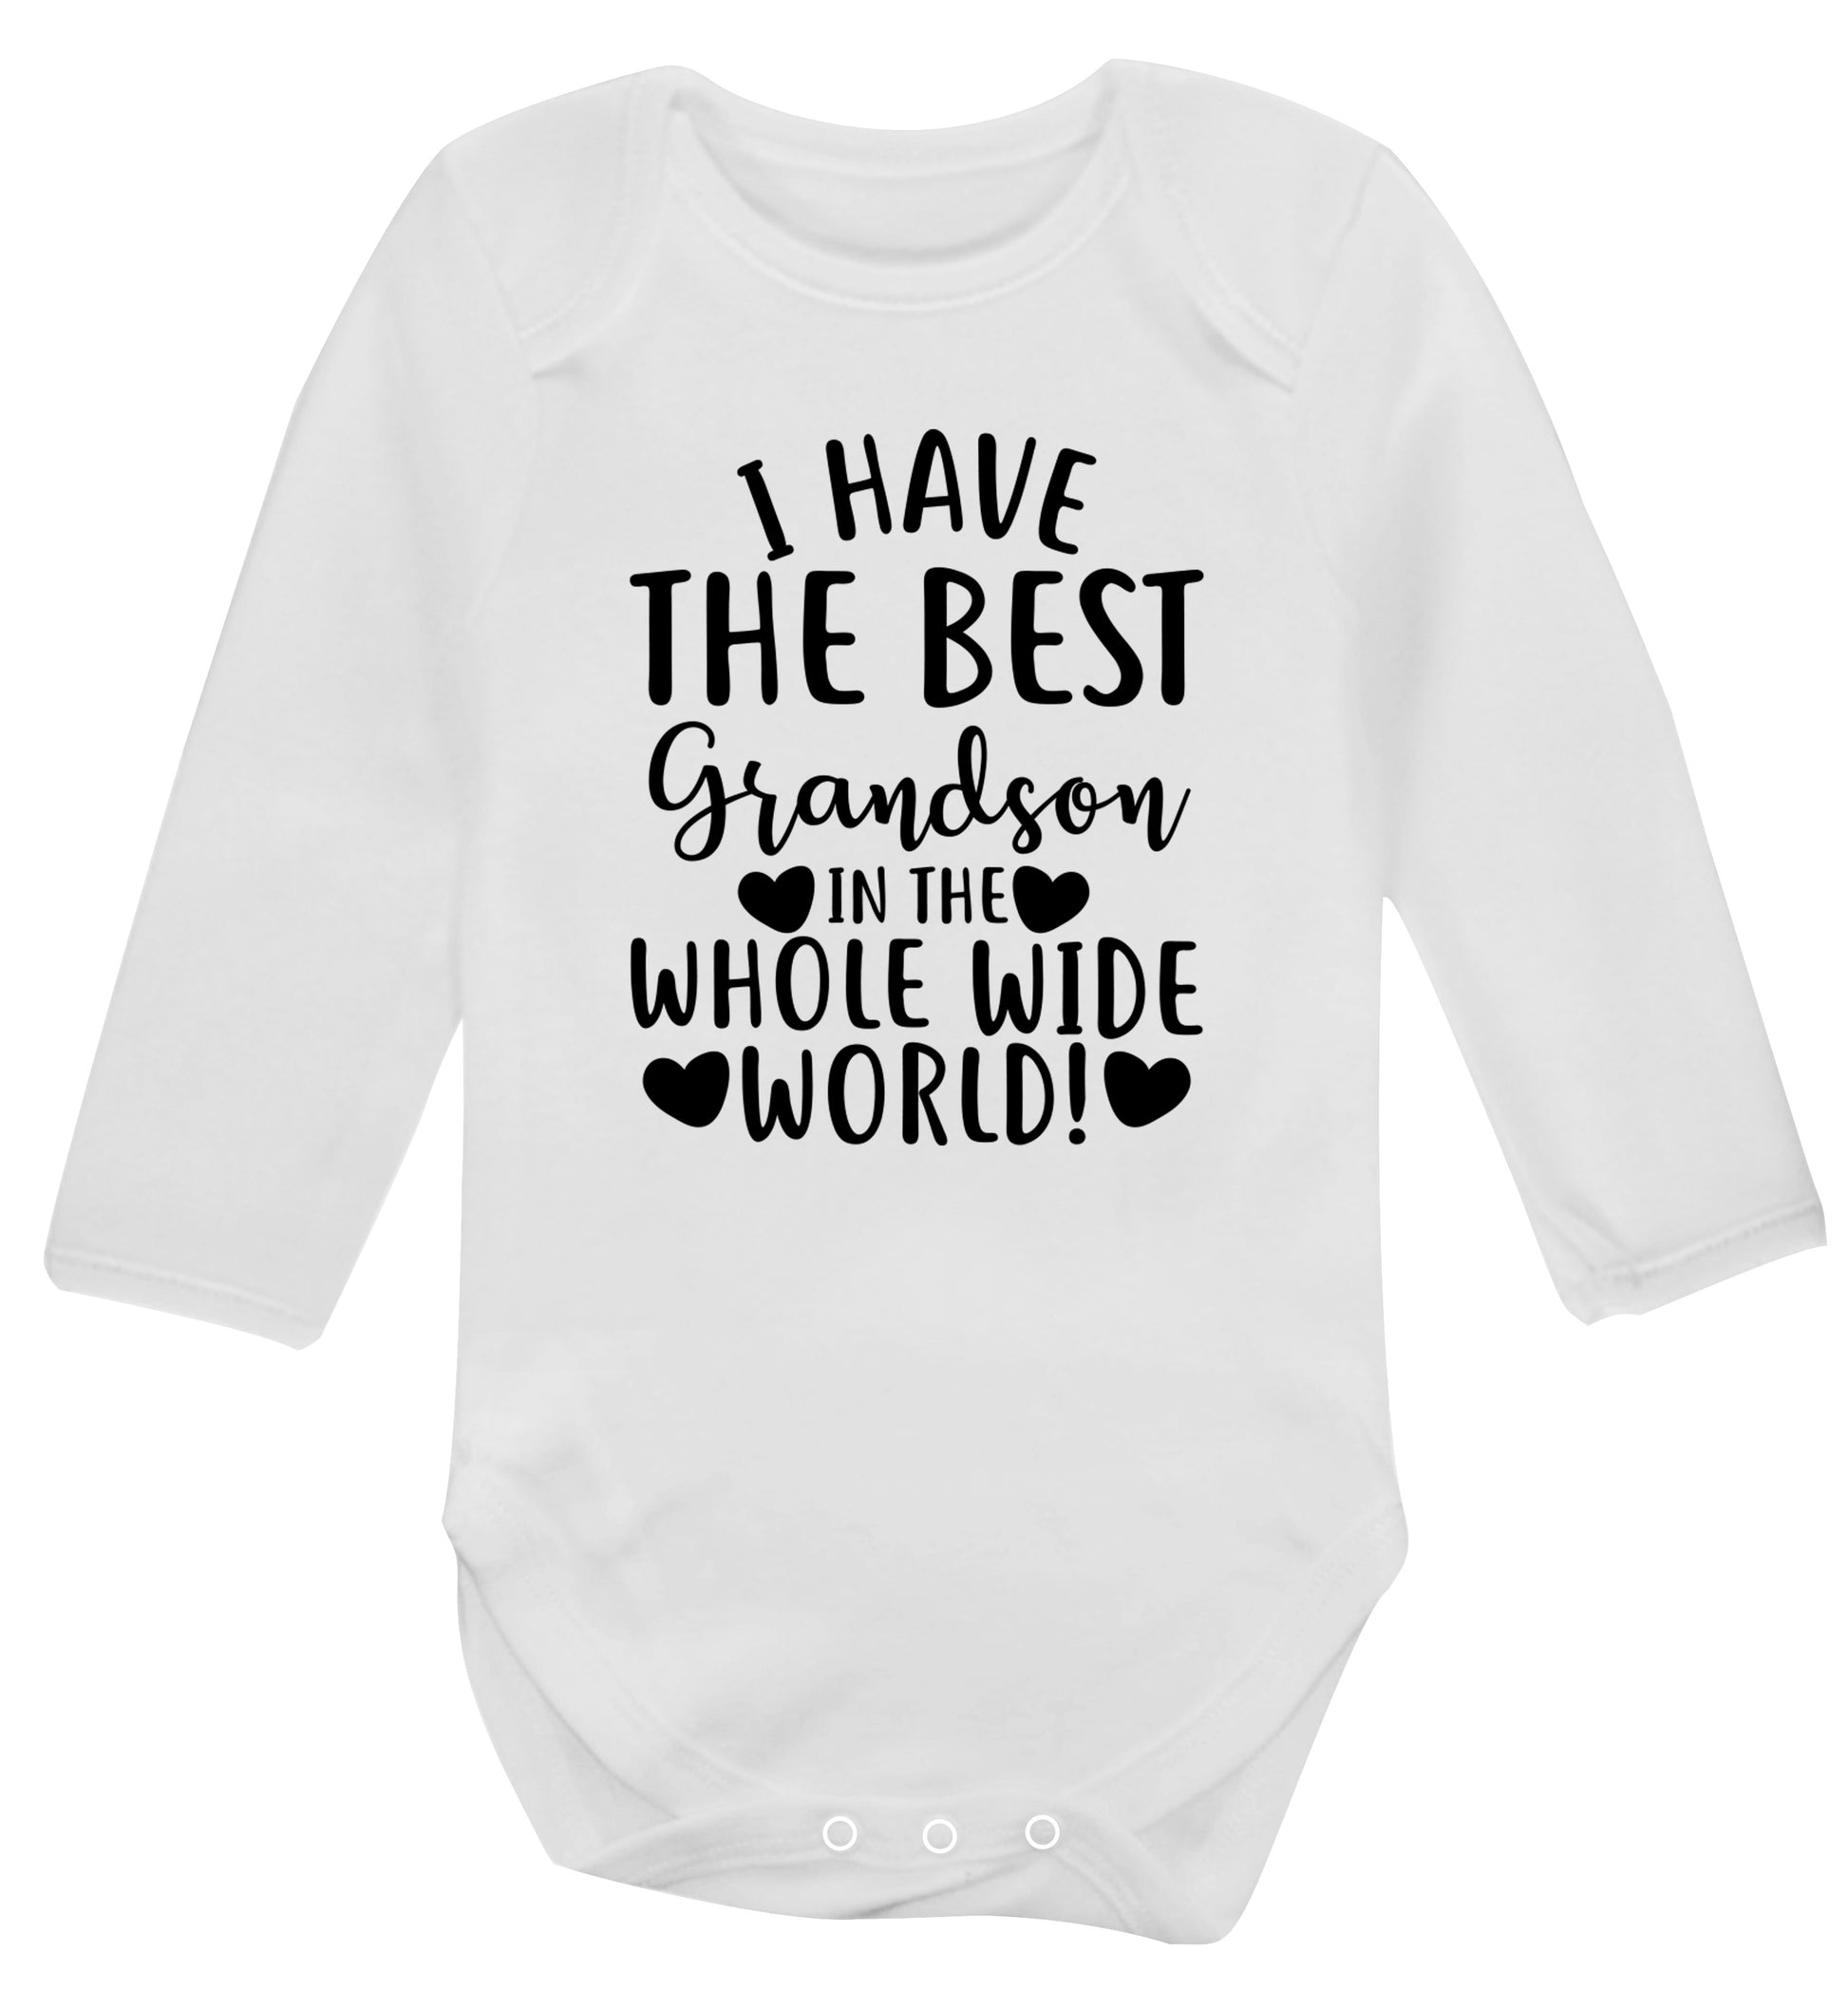 I have the best grandson in the whole wide world! Baby Vest long sleeved white 6-12 months